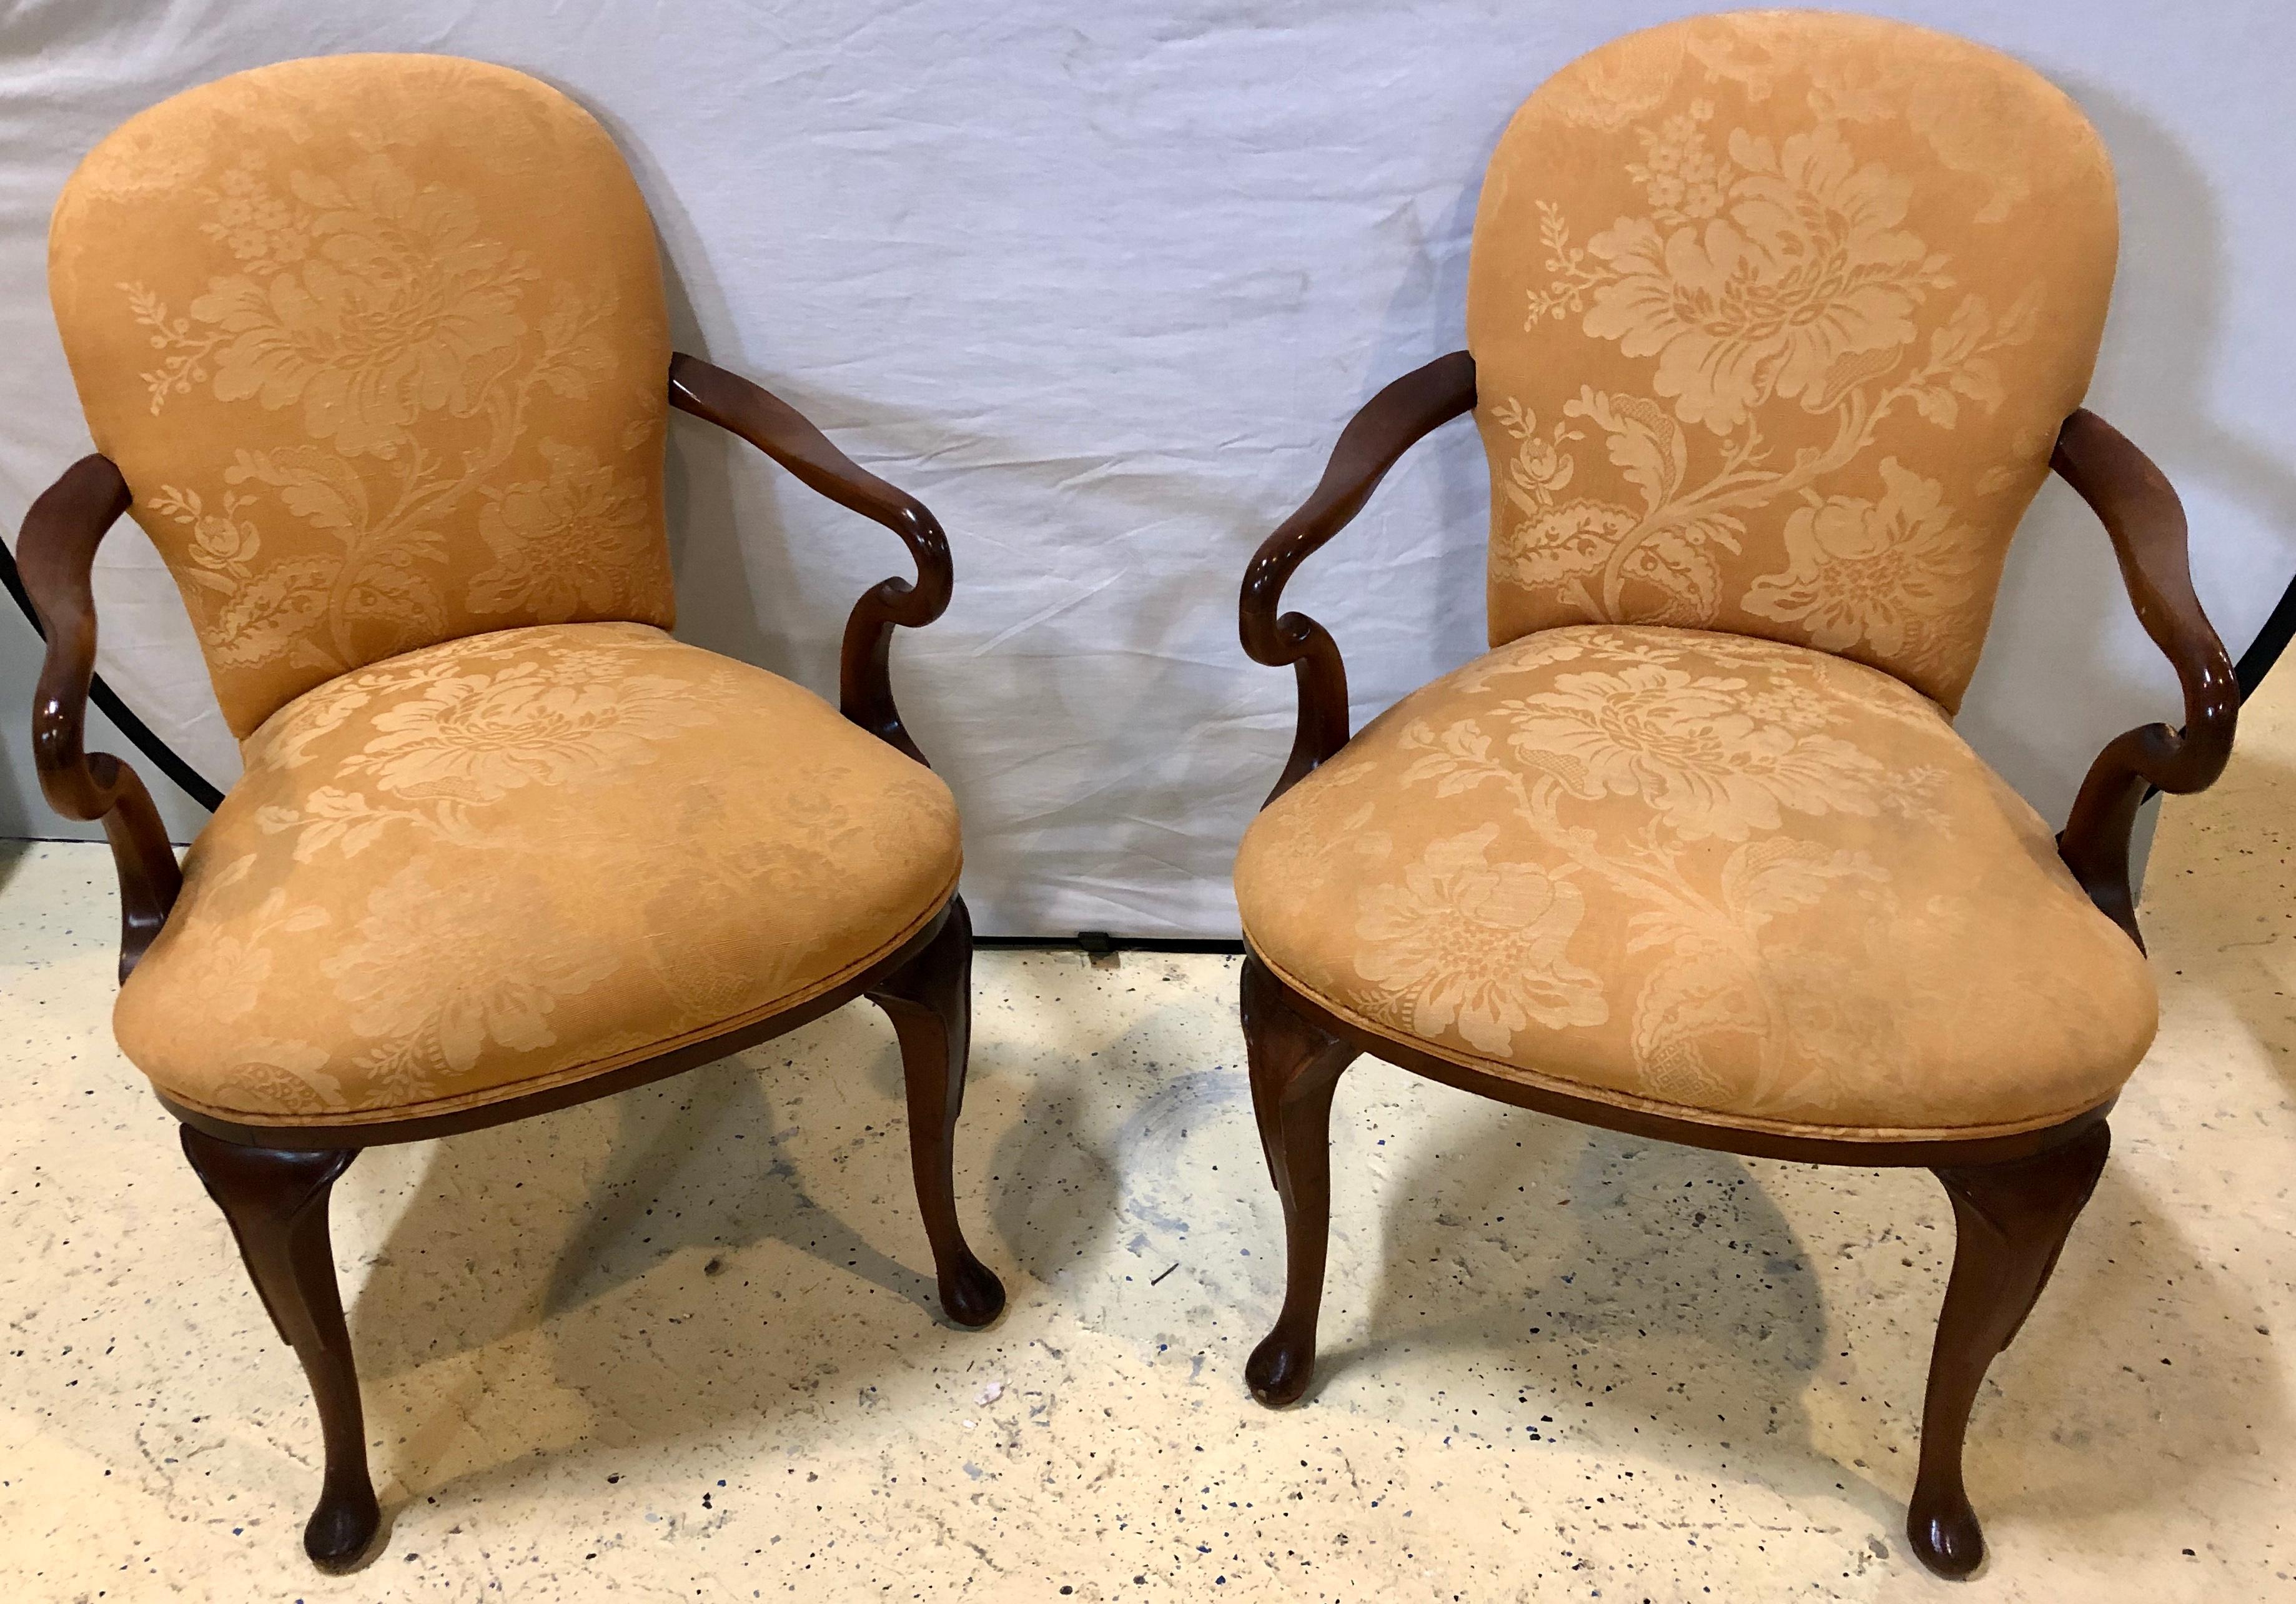 Pair of Queen Anne style open armchairs or bergeres. Having clean sleek and simple form are this stylish arm, office or desk chairs having a lovely upholstery. Nice large seats and backrests.